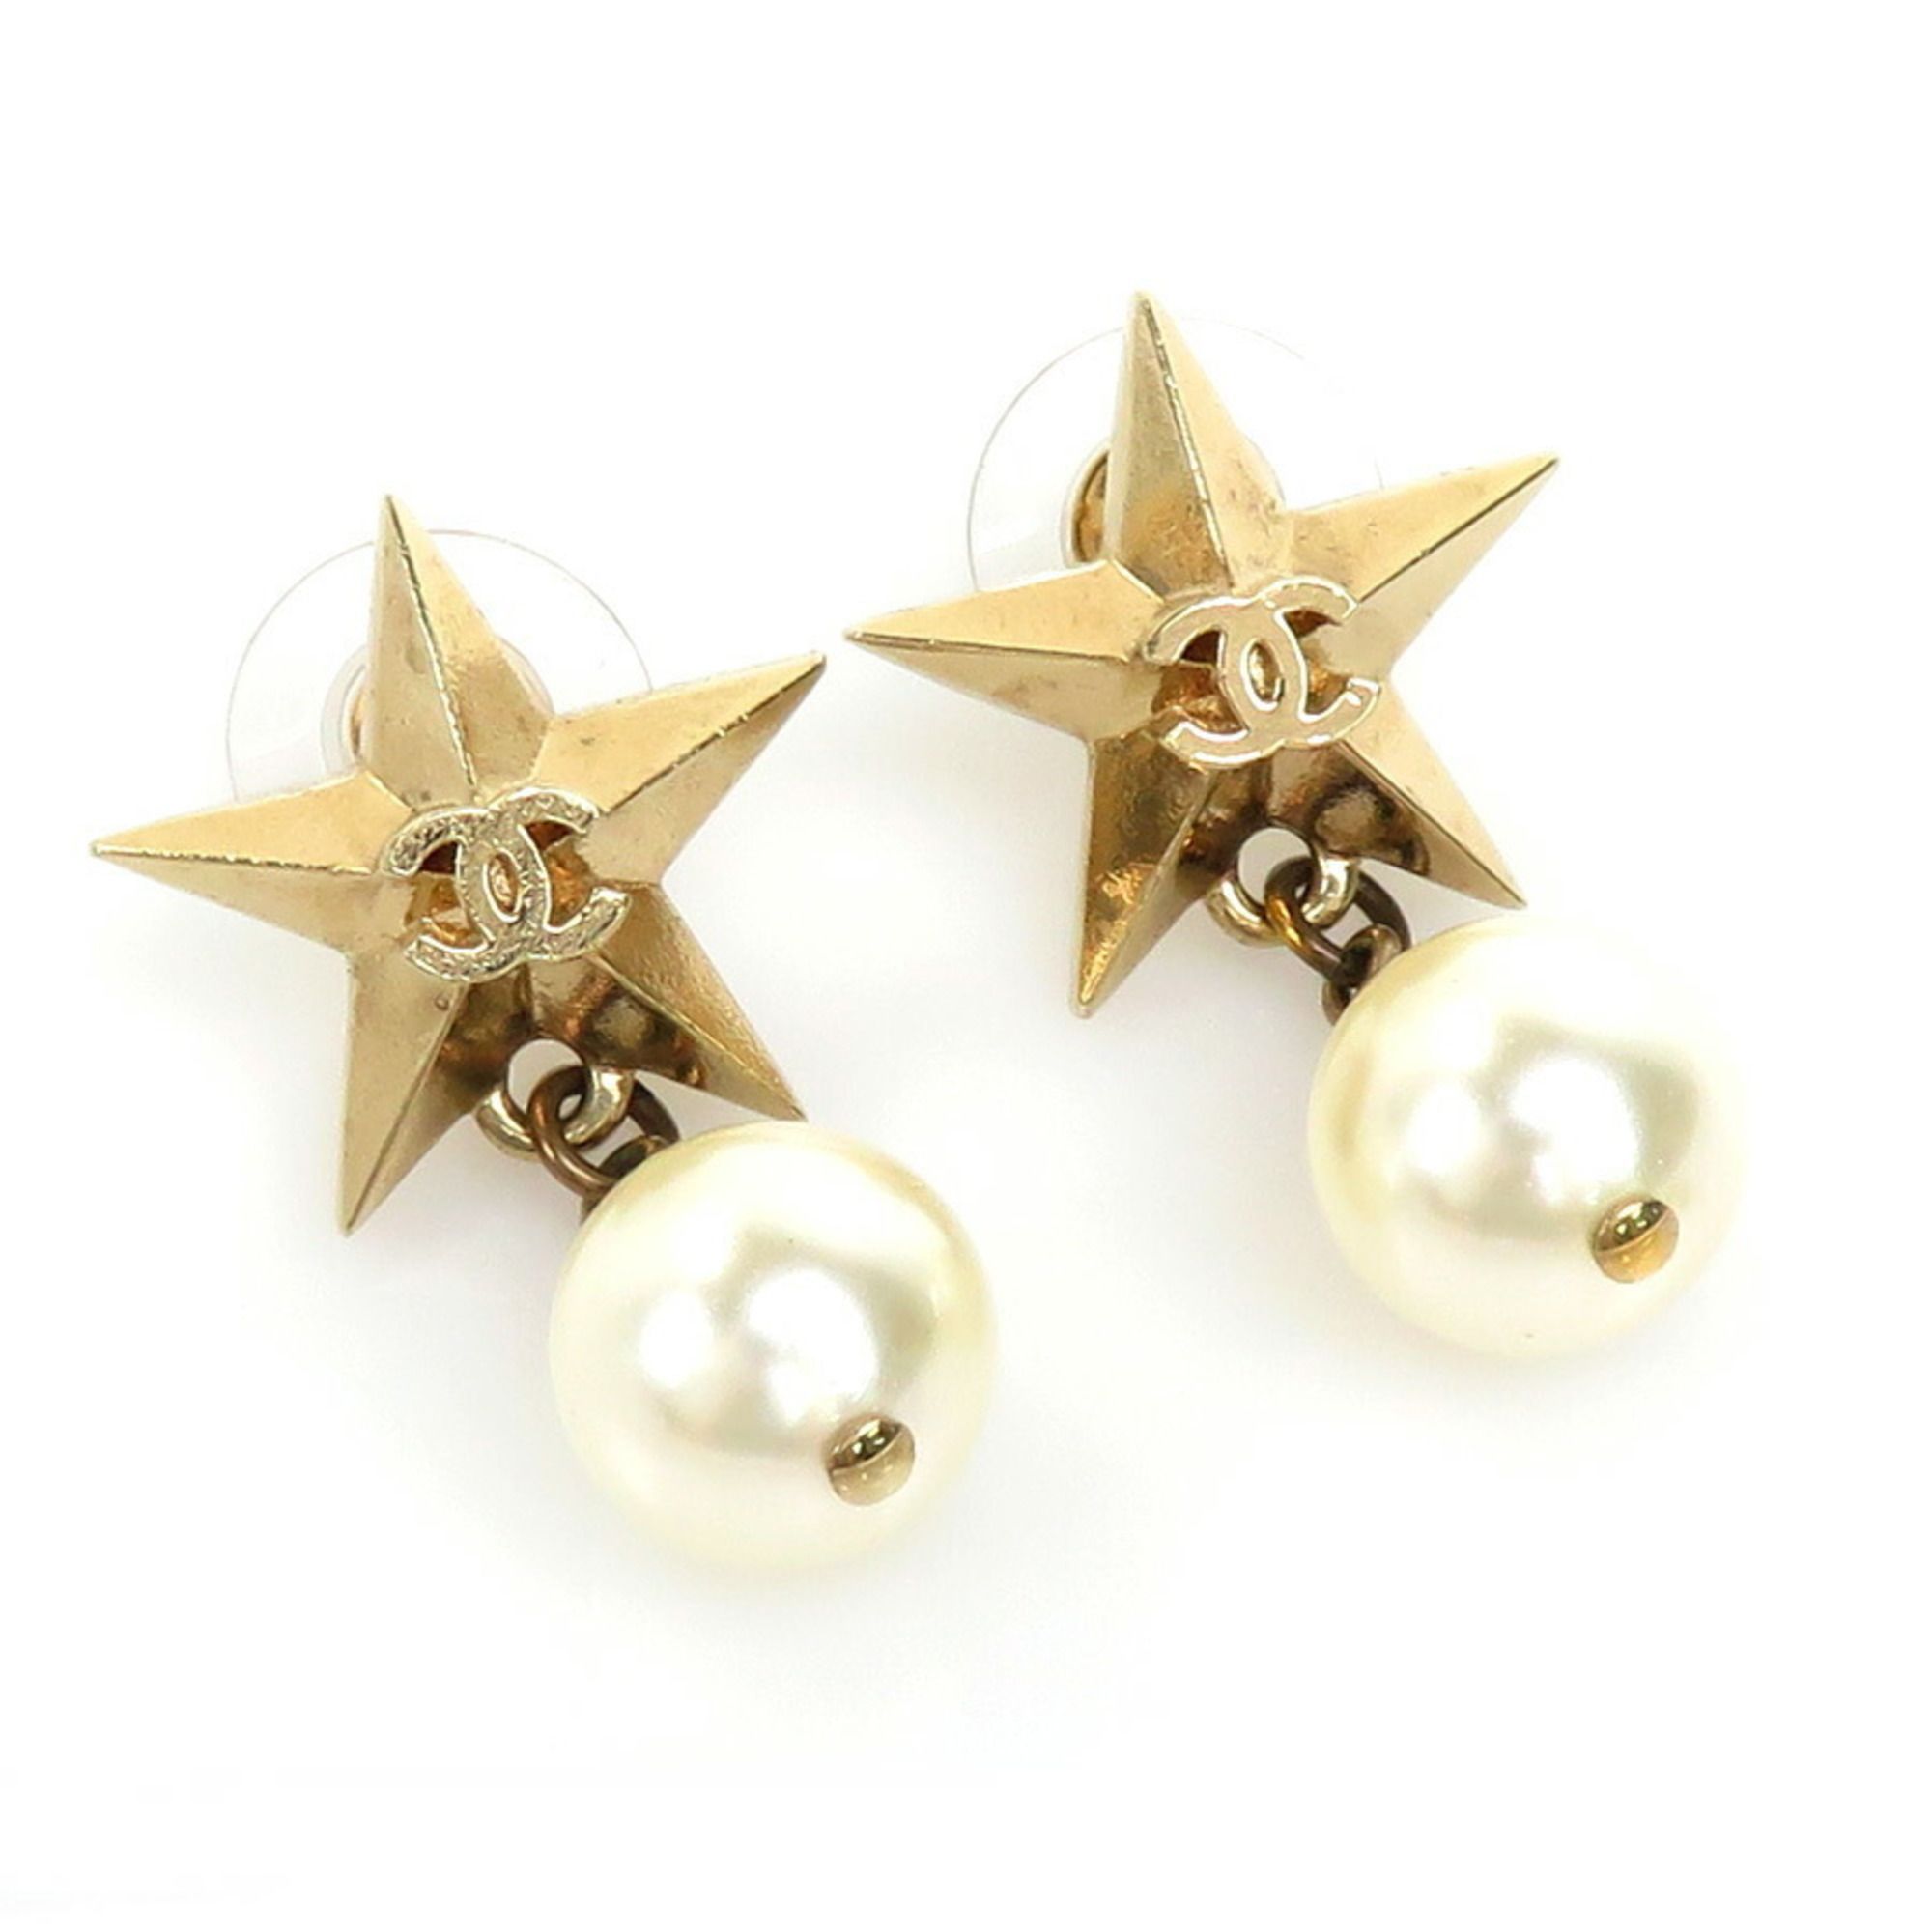 Chanel CHANEL Earrings Coco Mark Star Metal/Fake Pearl Gold/Off